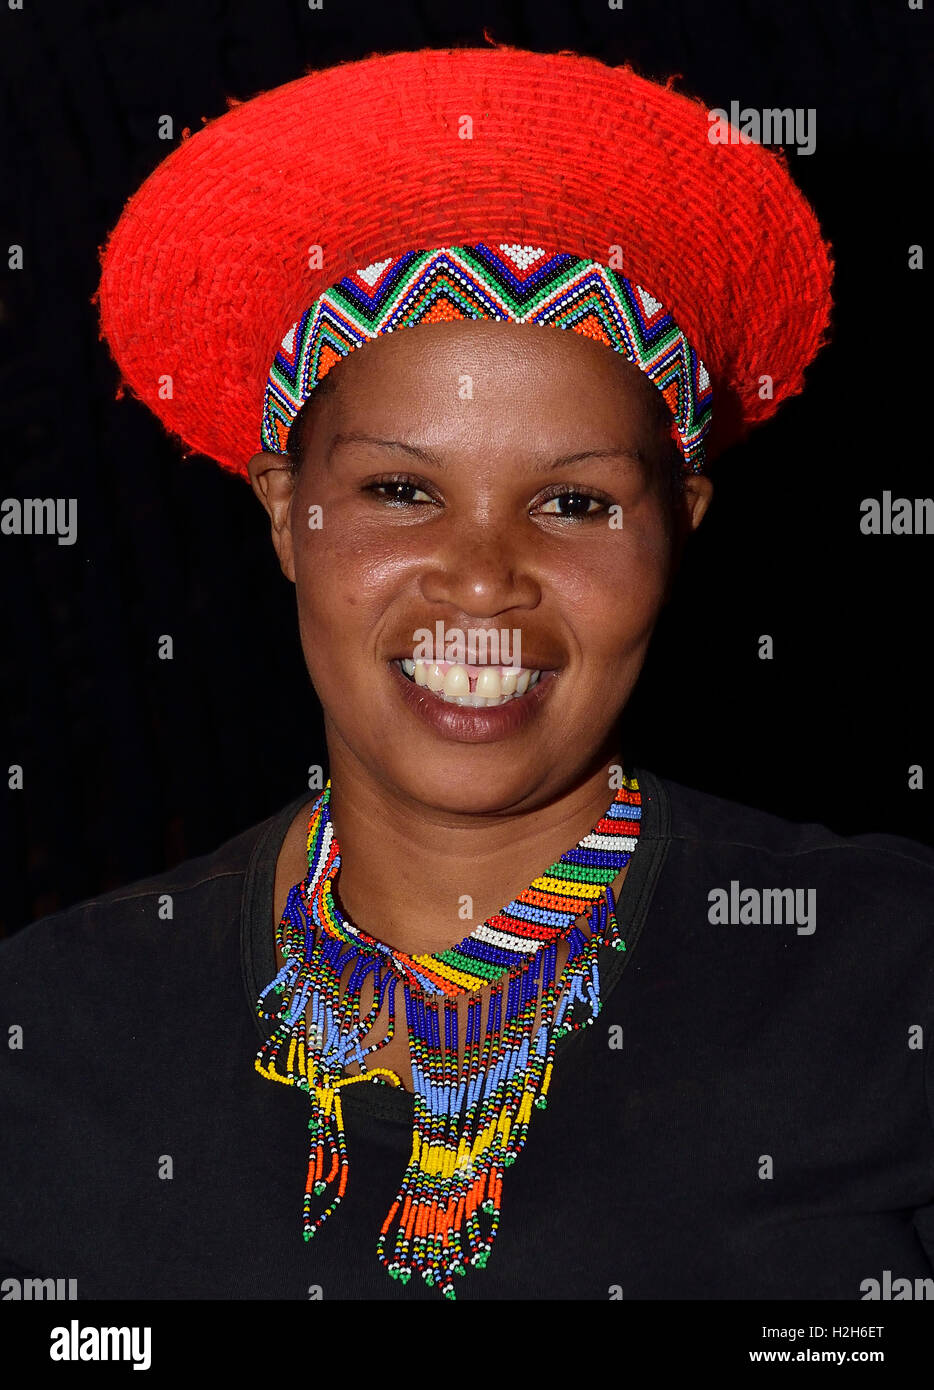 Shakaland Zulu girl in  a traditional Zulu hat  poses for the camera  at the Shakaland Cultural Village, Stock Photo